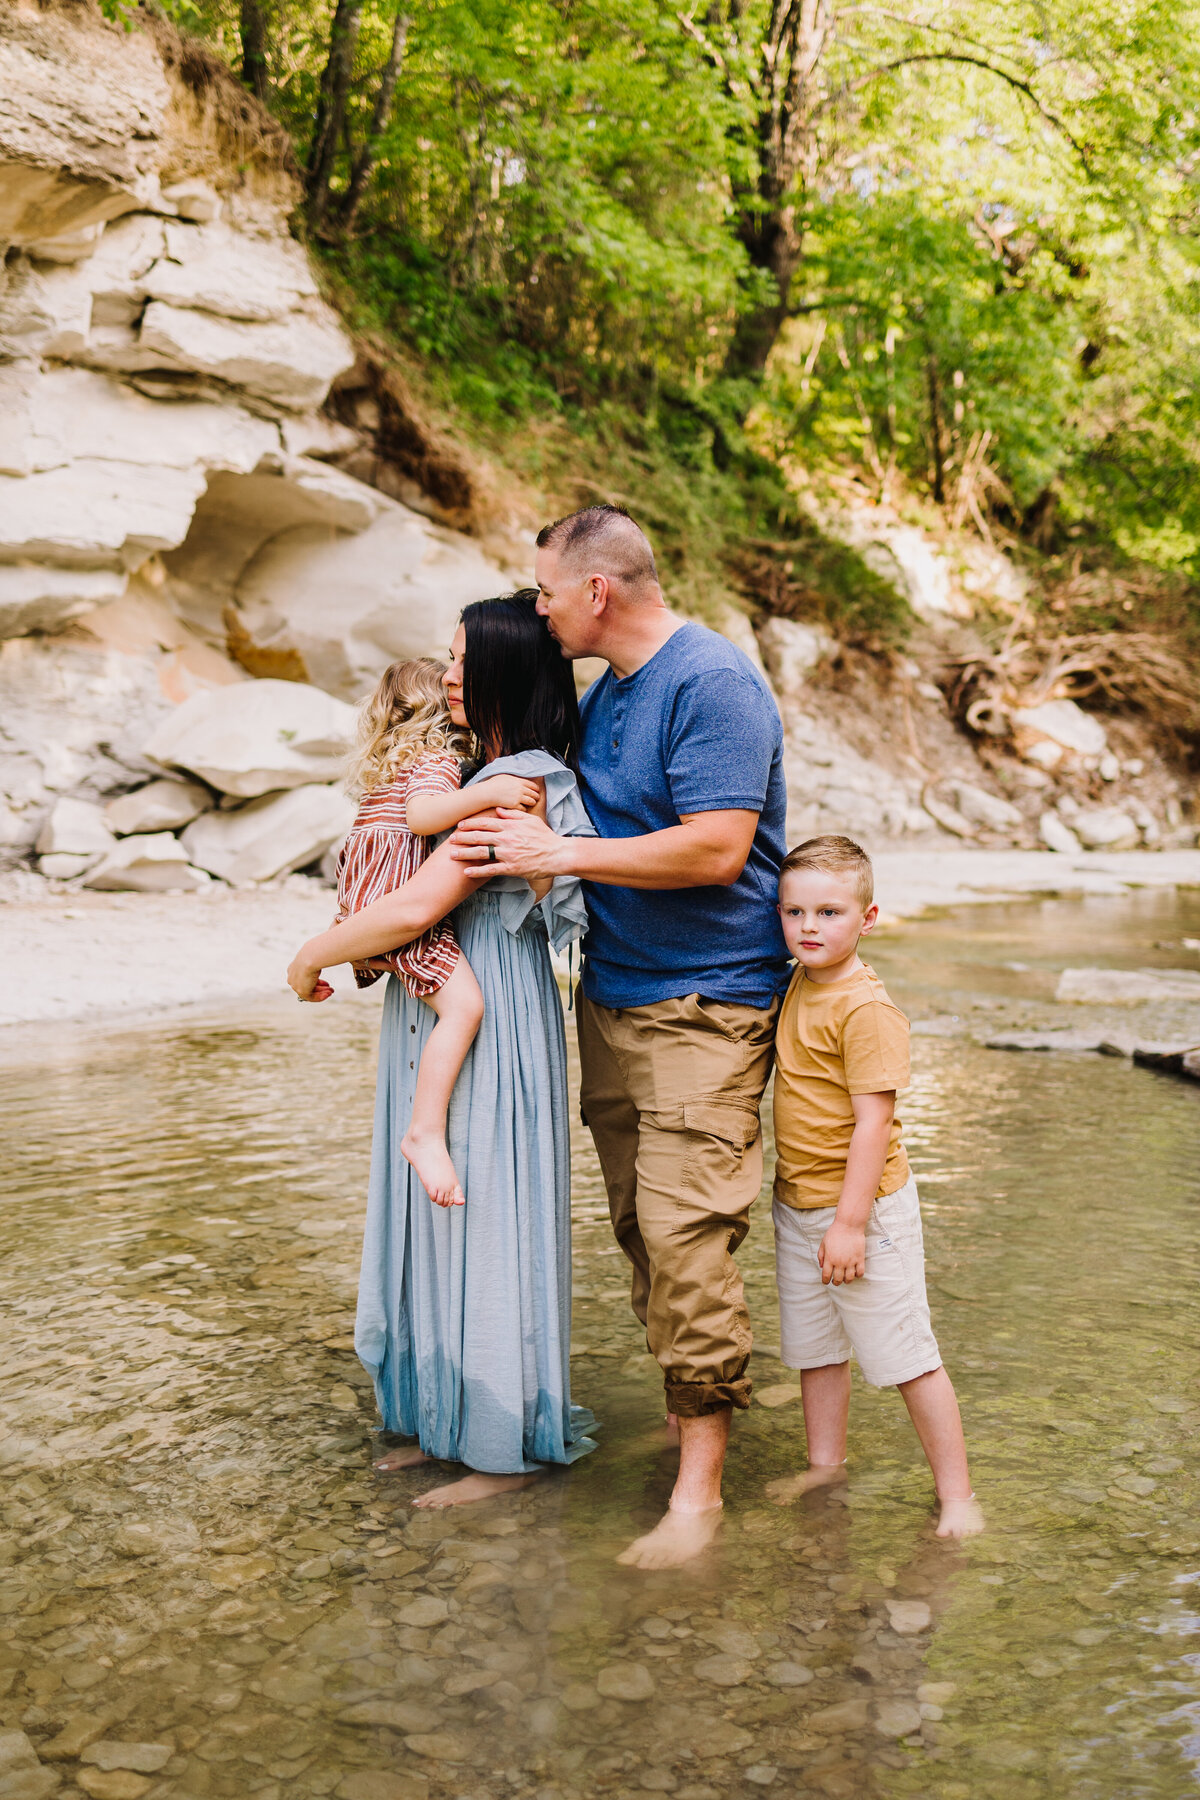 Family photo in a river with rocks and trees around them, the woman is carrying the girl with a flower dress and the man is kissing her on the head with brown pants and blue shirt and the boy is hugging his father's leg with a yellow t-shirt